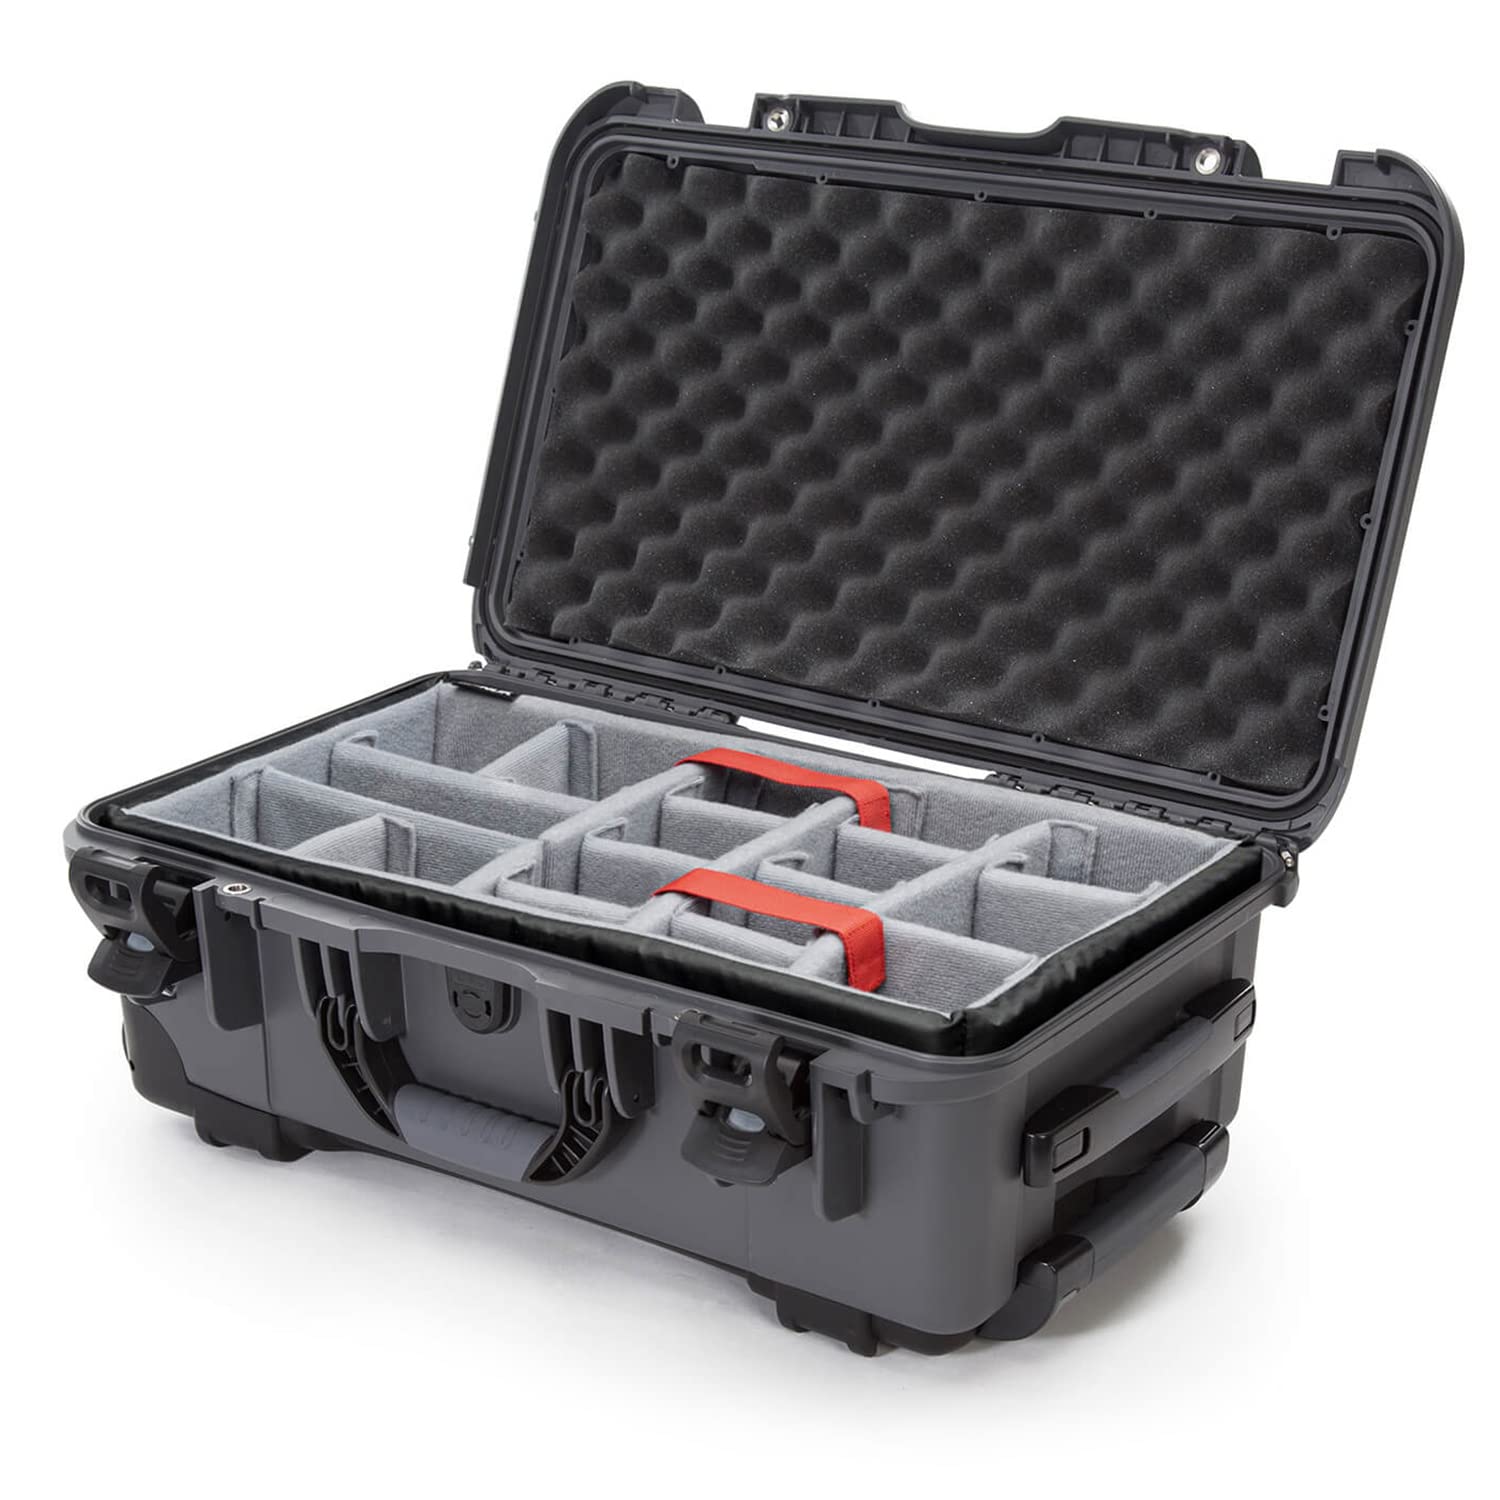 Nanuk 935 Waterproof Carry-On Hard Case with Wheels and Padded Divider - Graphite